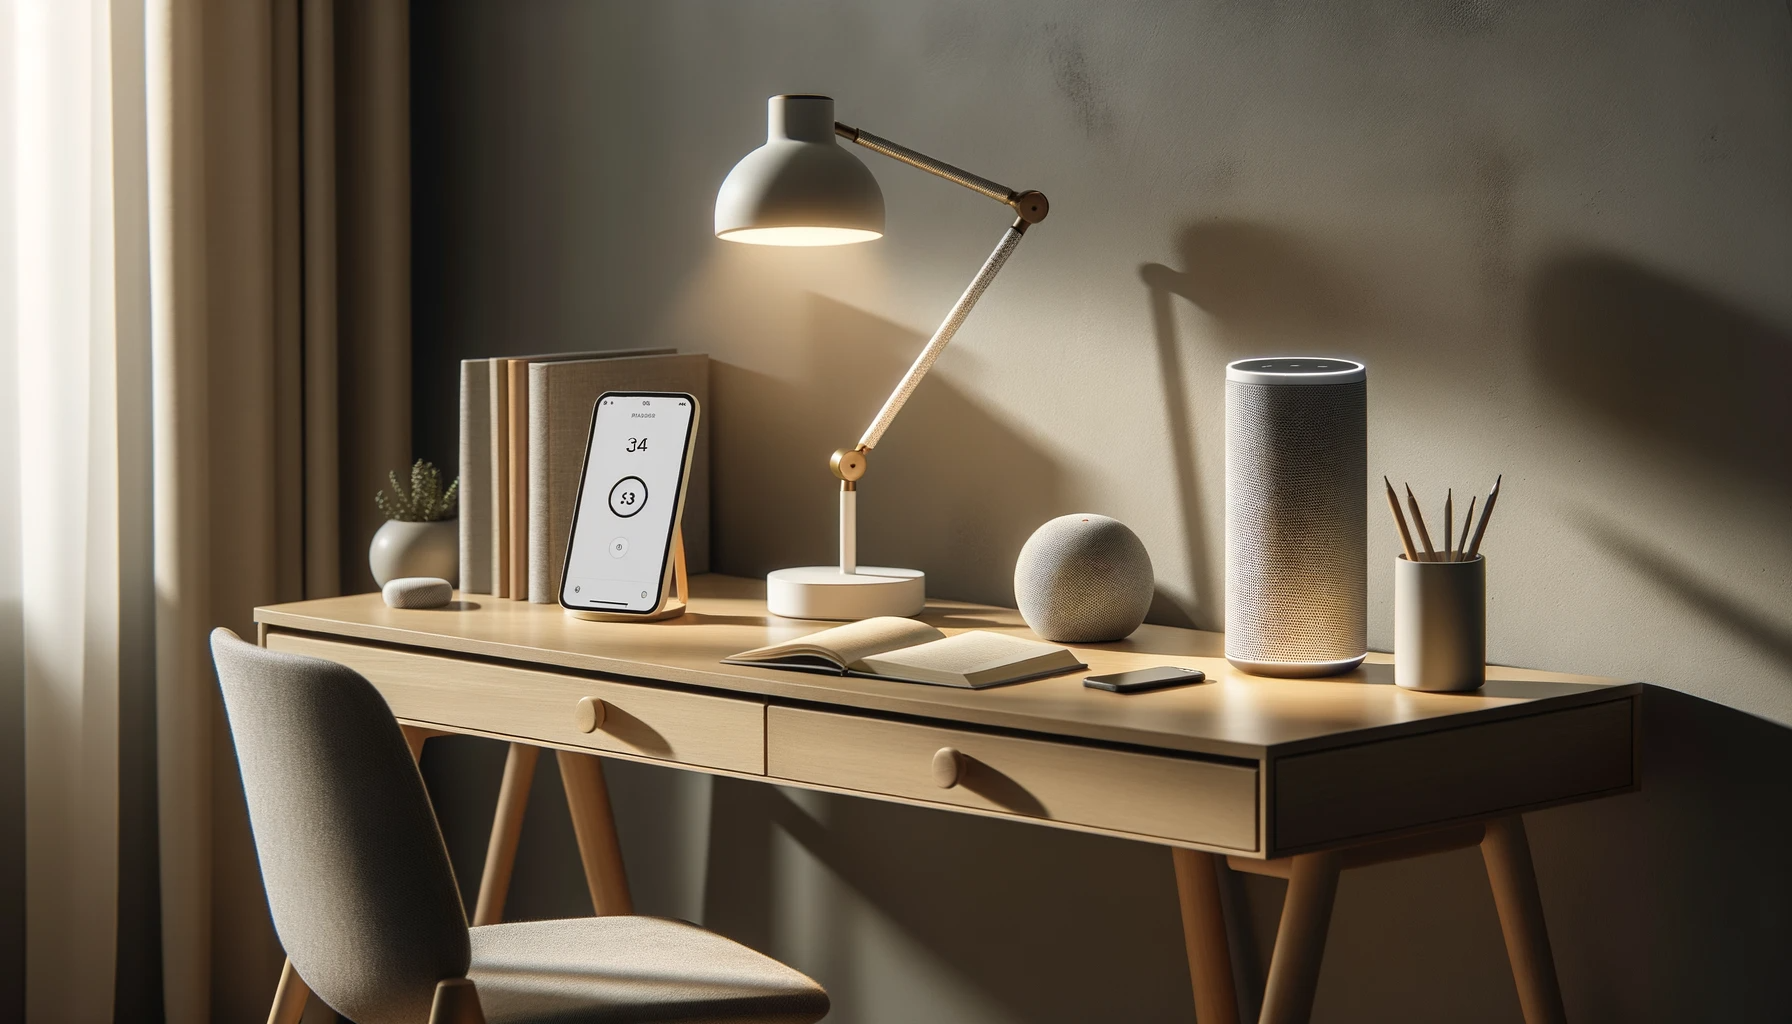 Presenting the More Effective, Accessible Smart Home With LG ThinQ